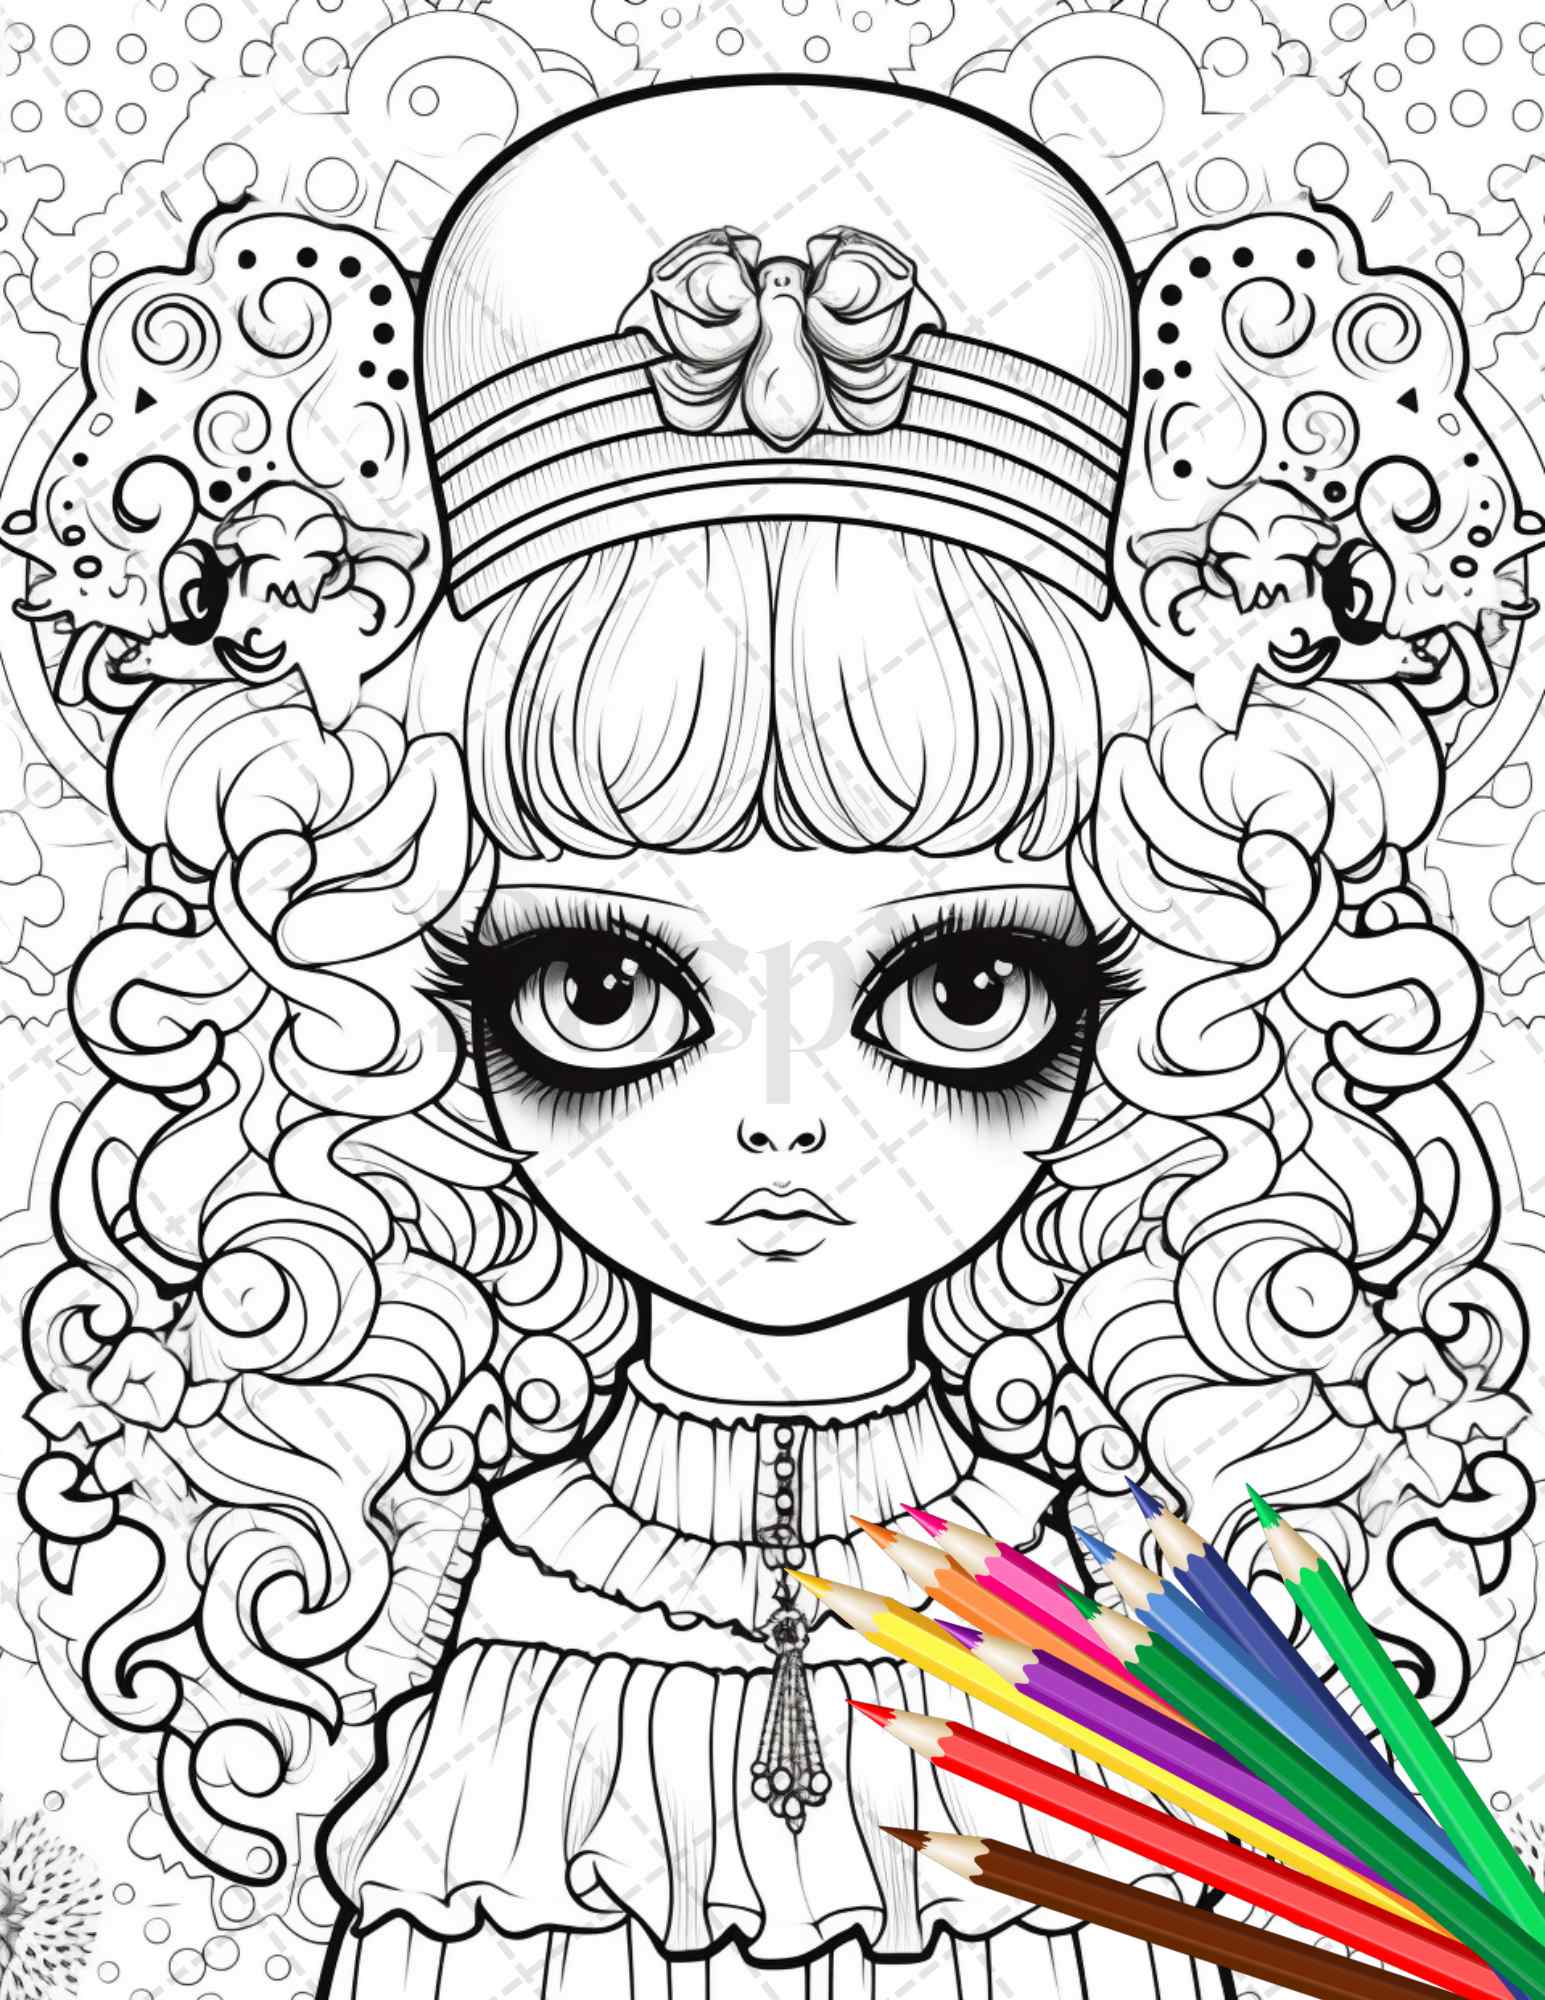 Adult Coloring Book Art Therapy Volume 2 Printable PDF Coloring Book  Digital Download, Print at Home 20 Adult Coloring Page Patterns 